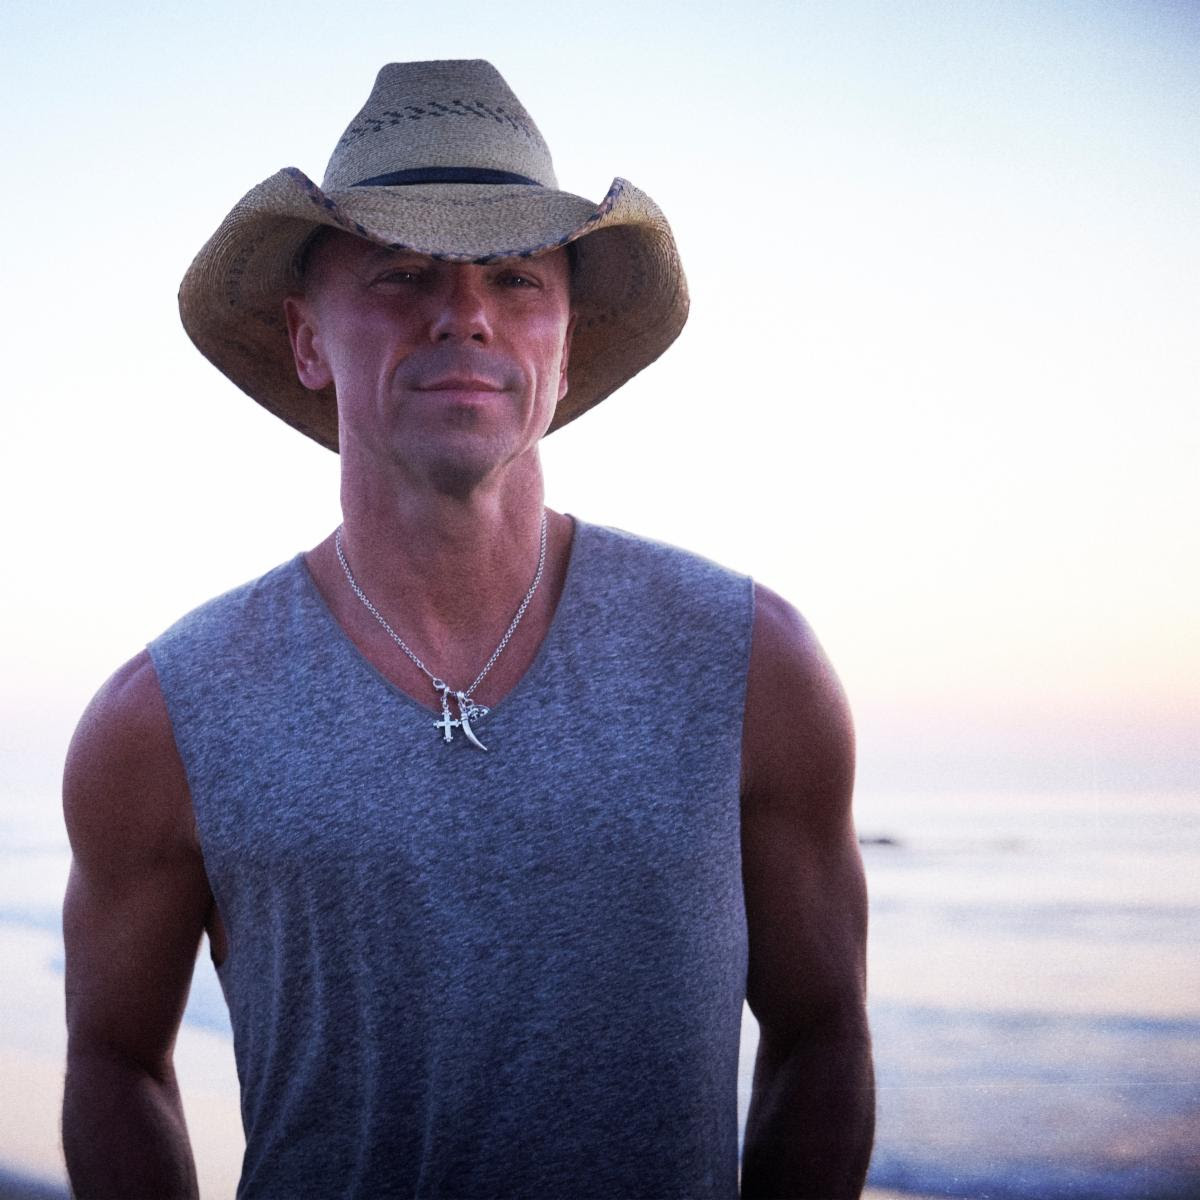 Kenny Chesney Announces “Here And Now” Album for May 1, 2020